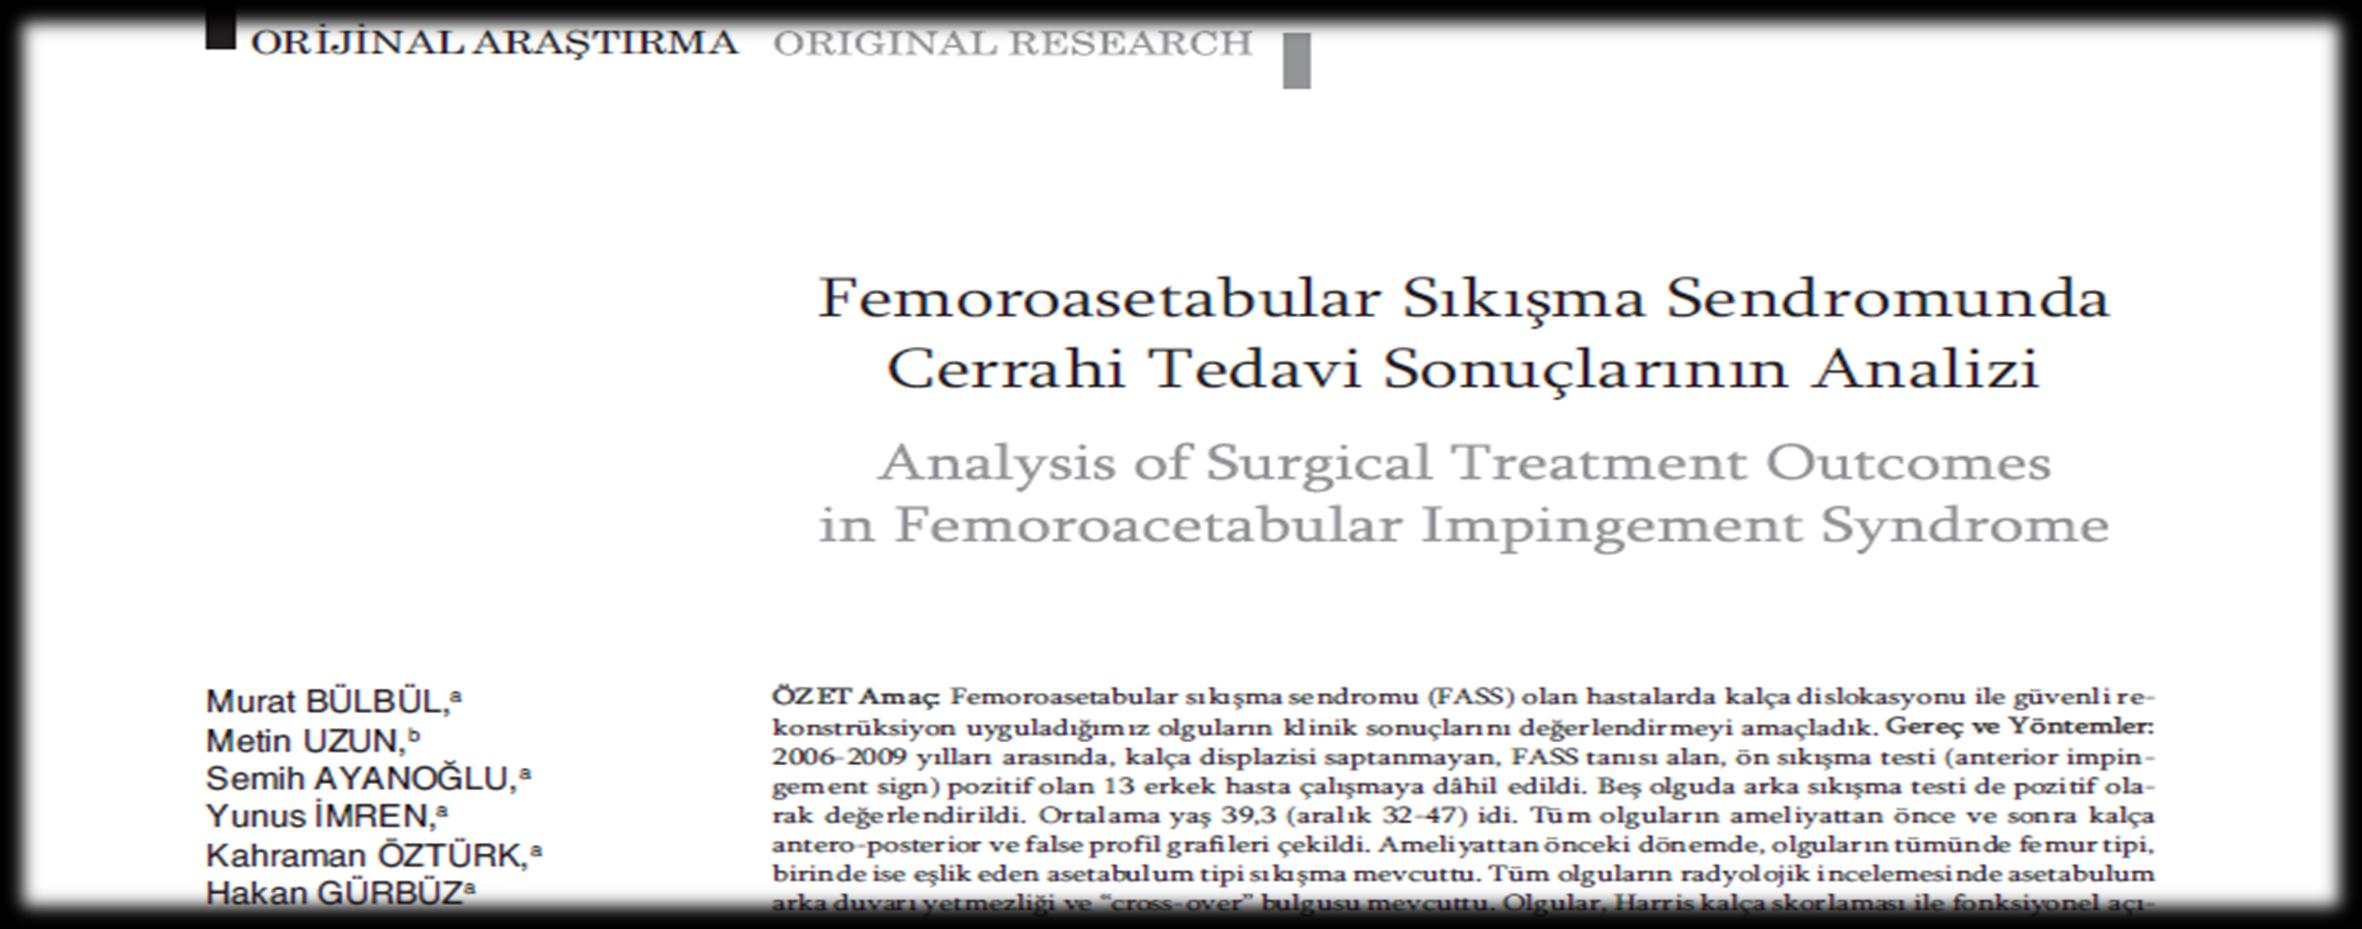 Analysis of Surgical Treatment Outcomes in Femoroacetabular